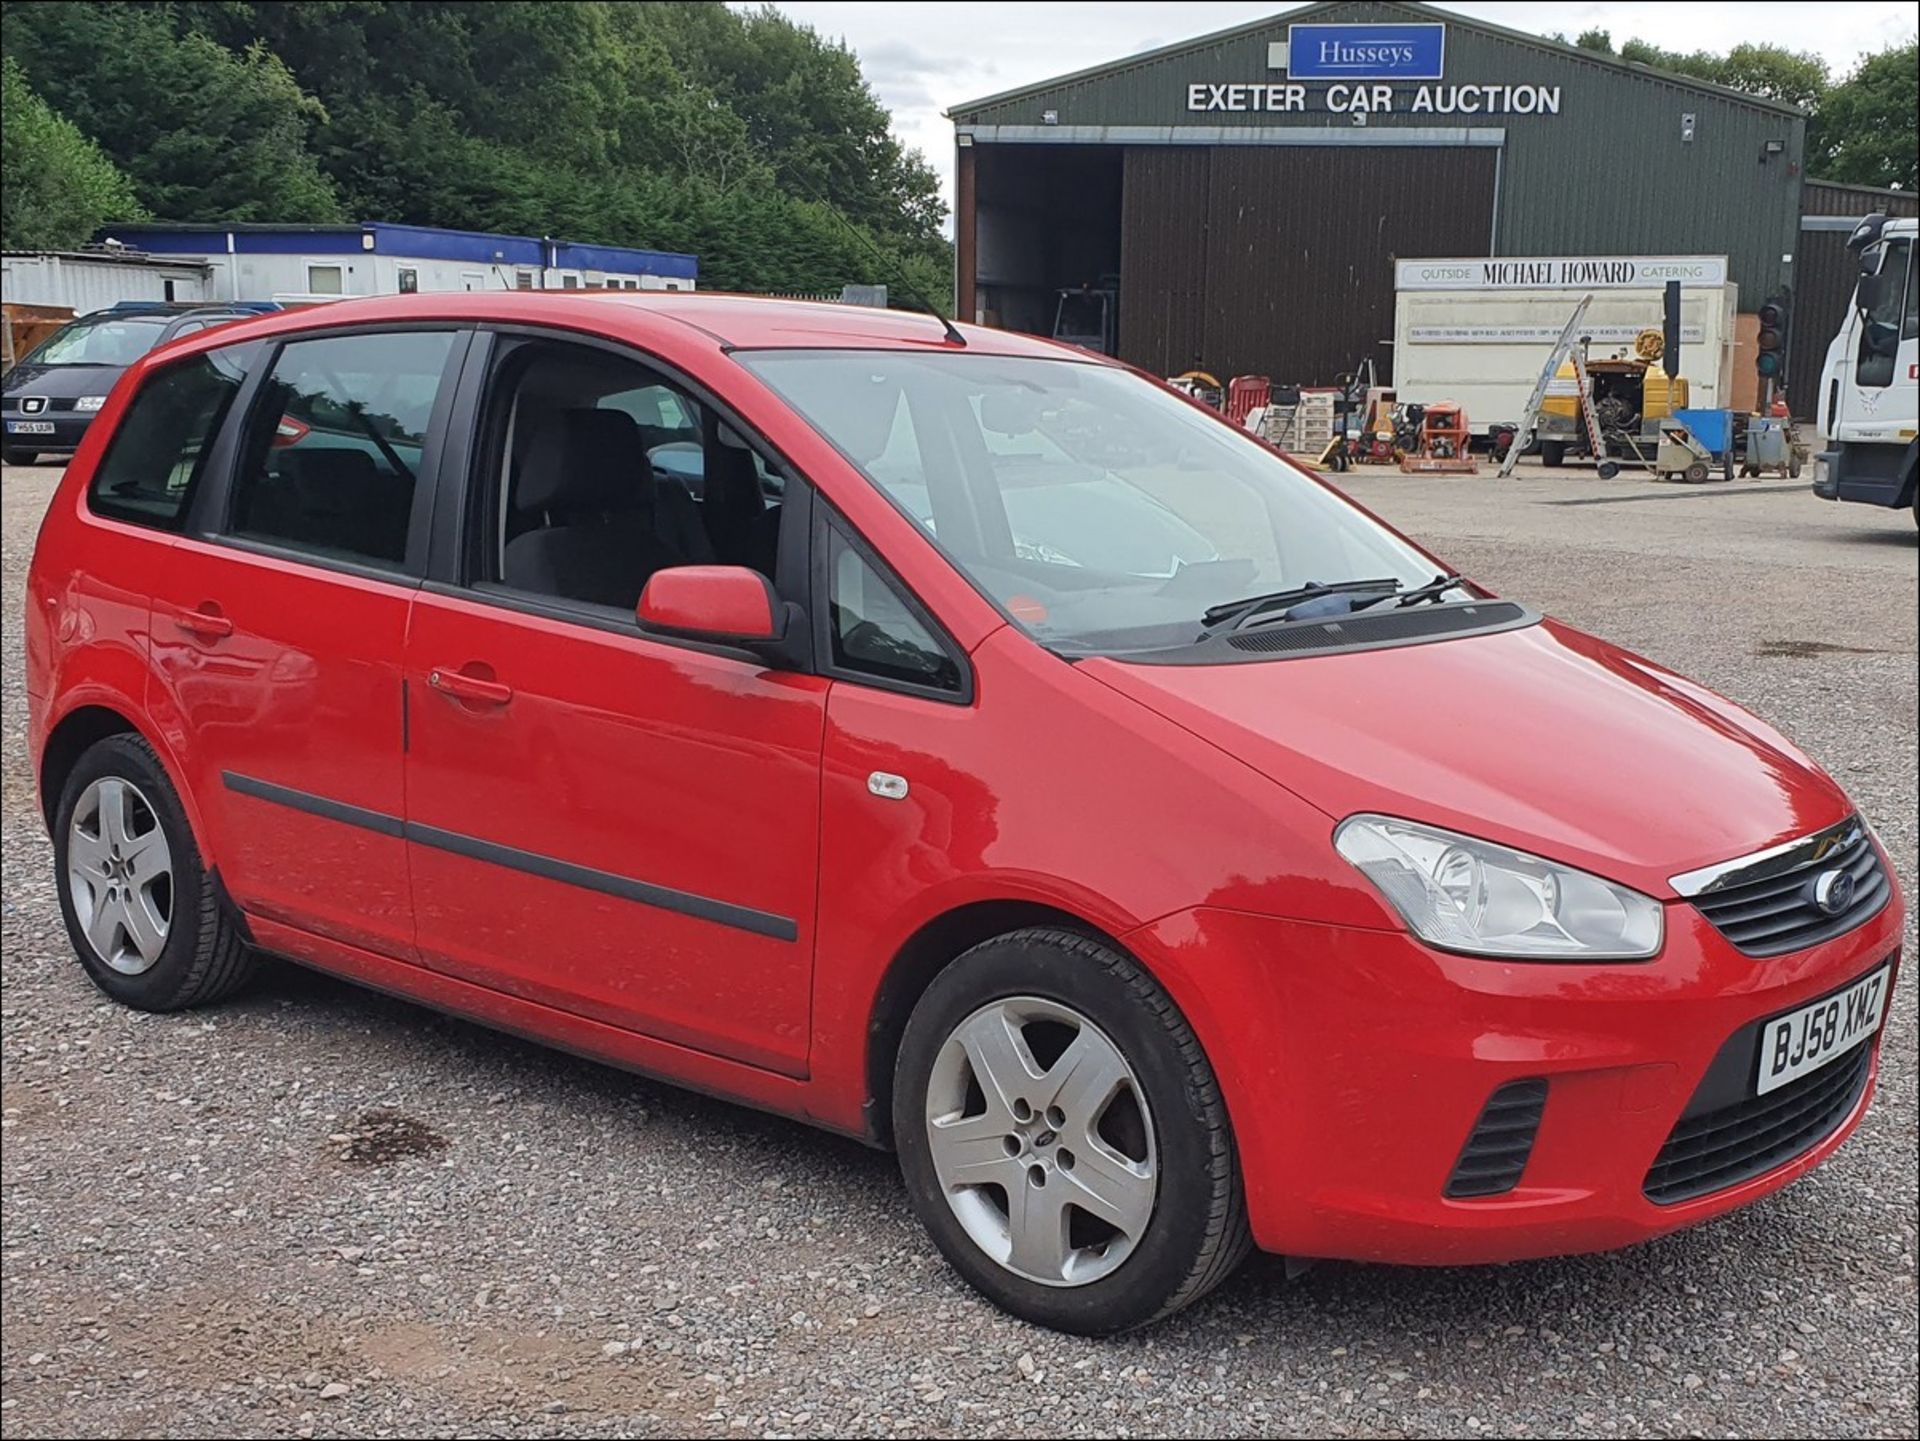 08/58 FORD C-MAX STYLE TD 90 - 1560cc 5dr MPV (Red, 153k)